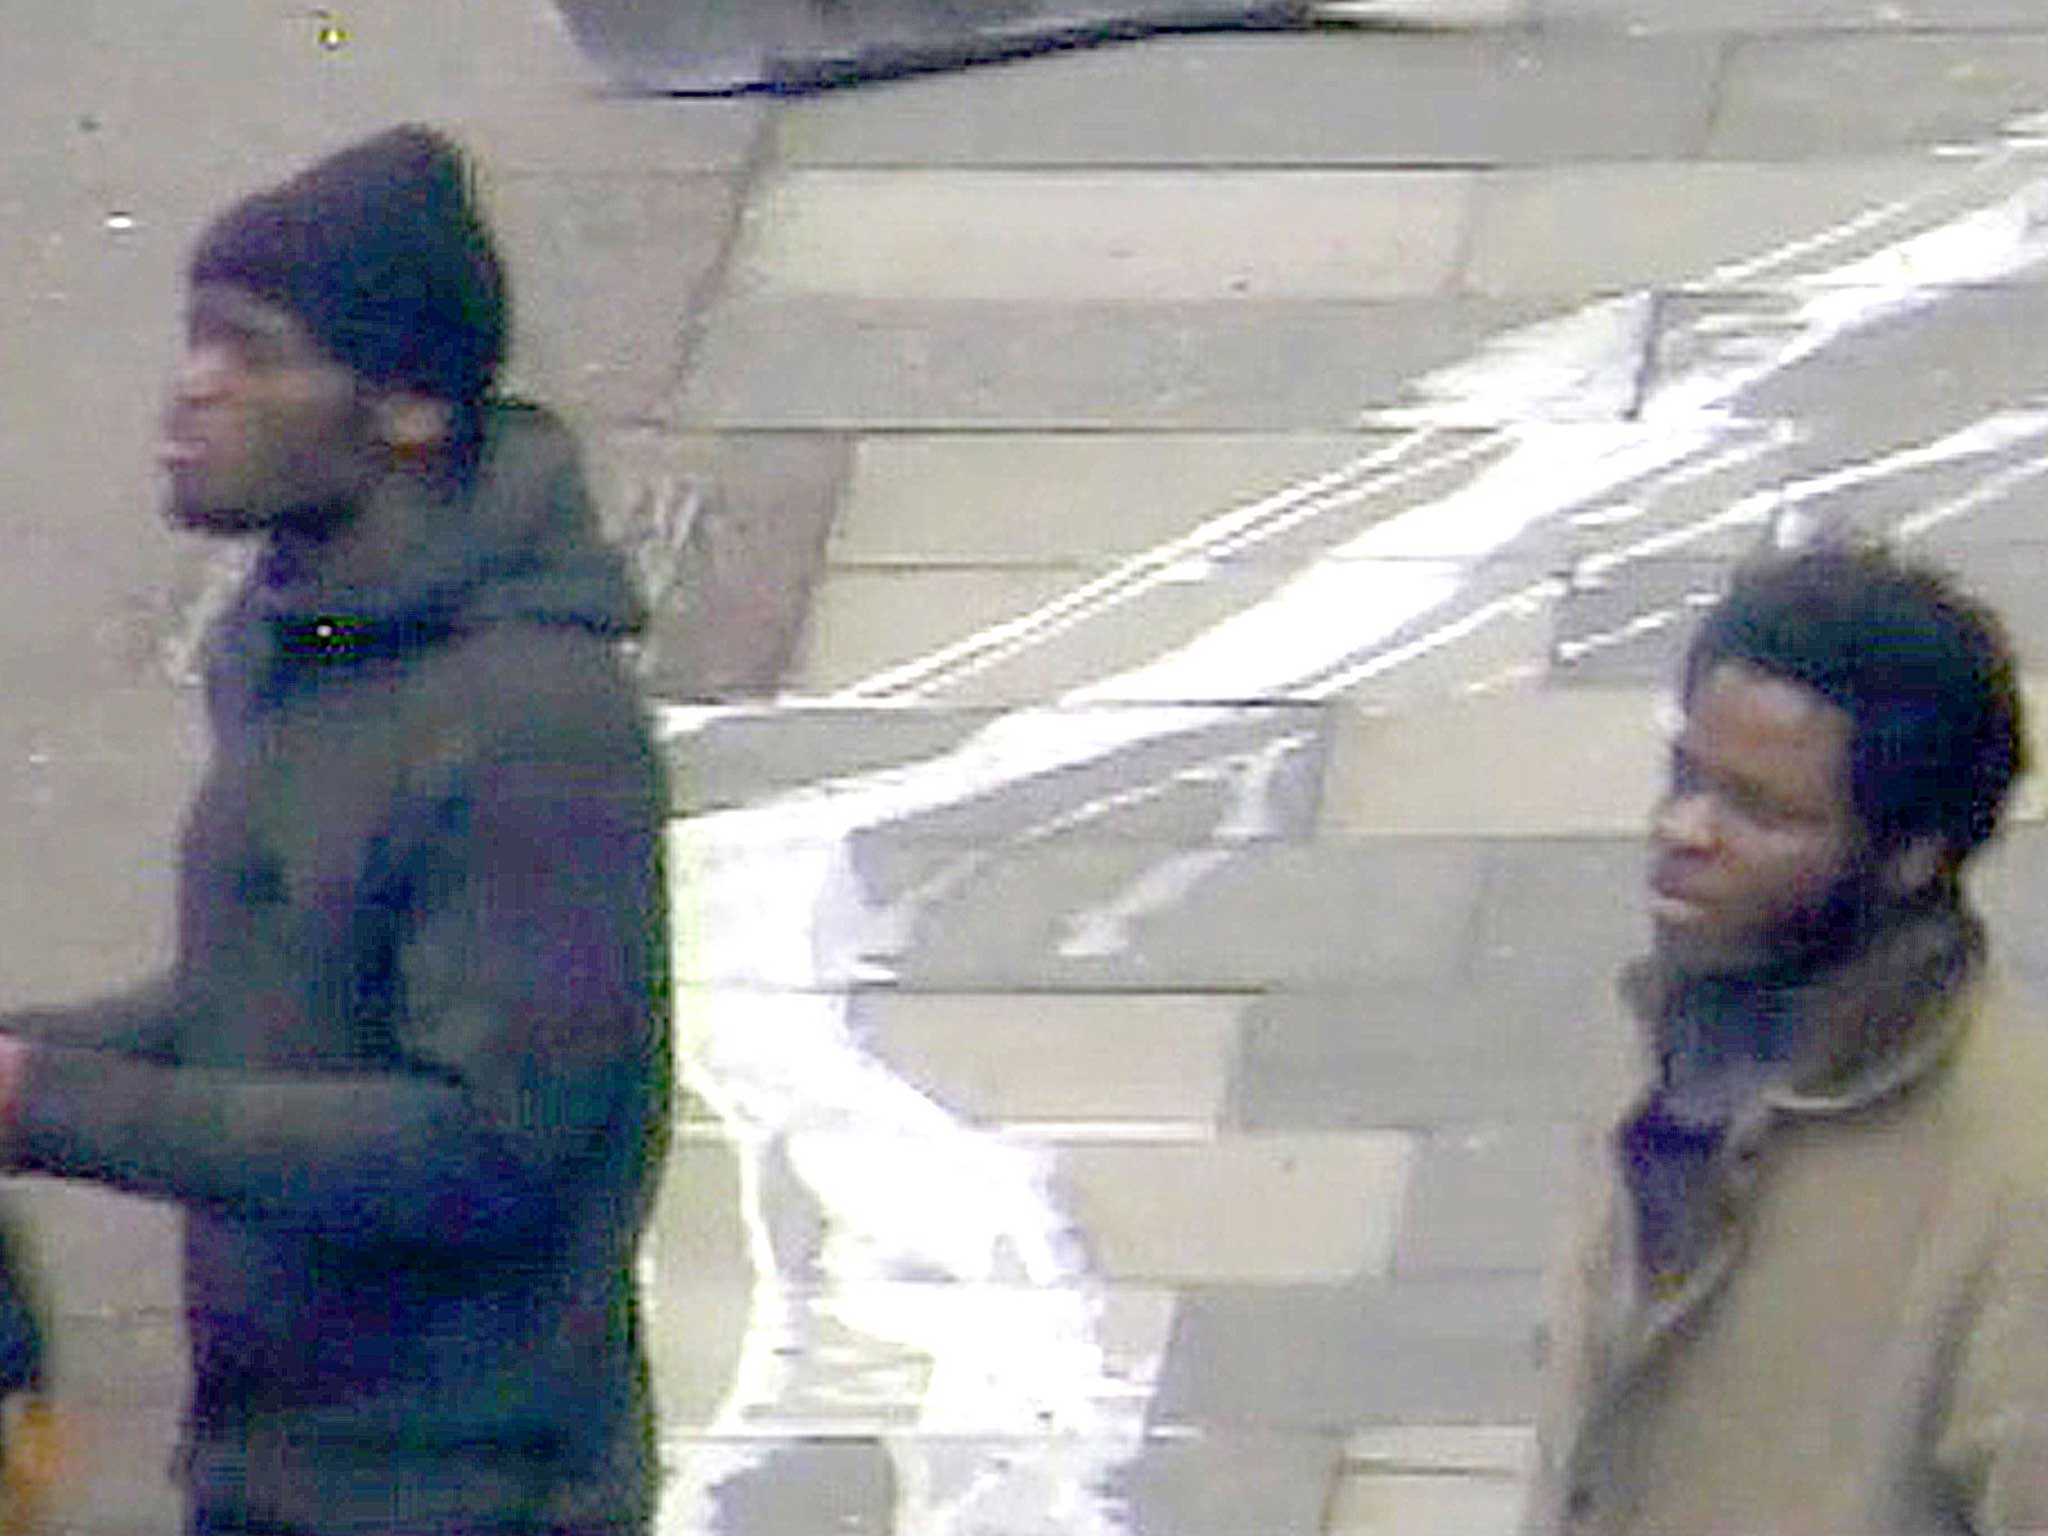 CCTV from 22 May of Michael Adebolajo and Michael Adebowale